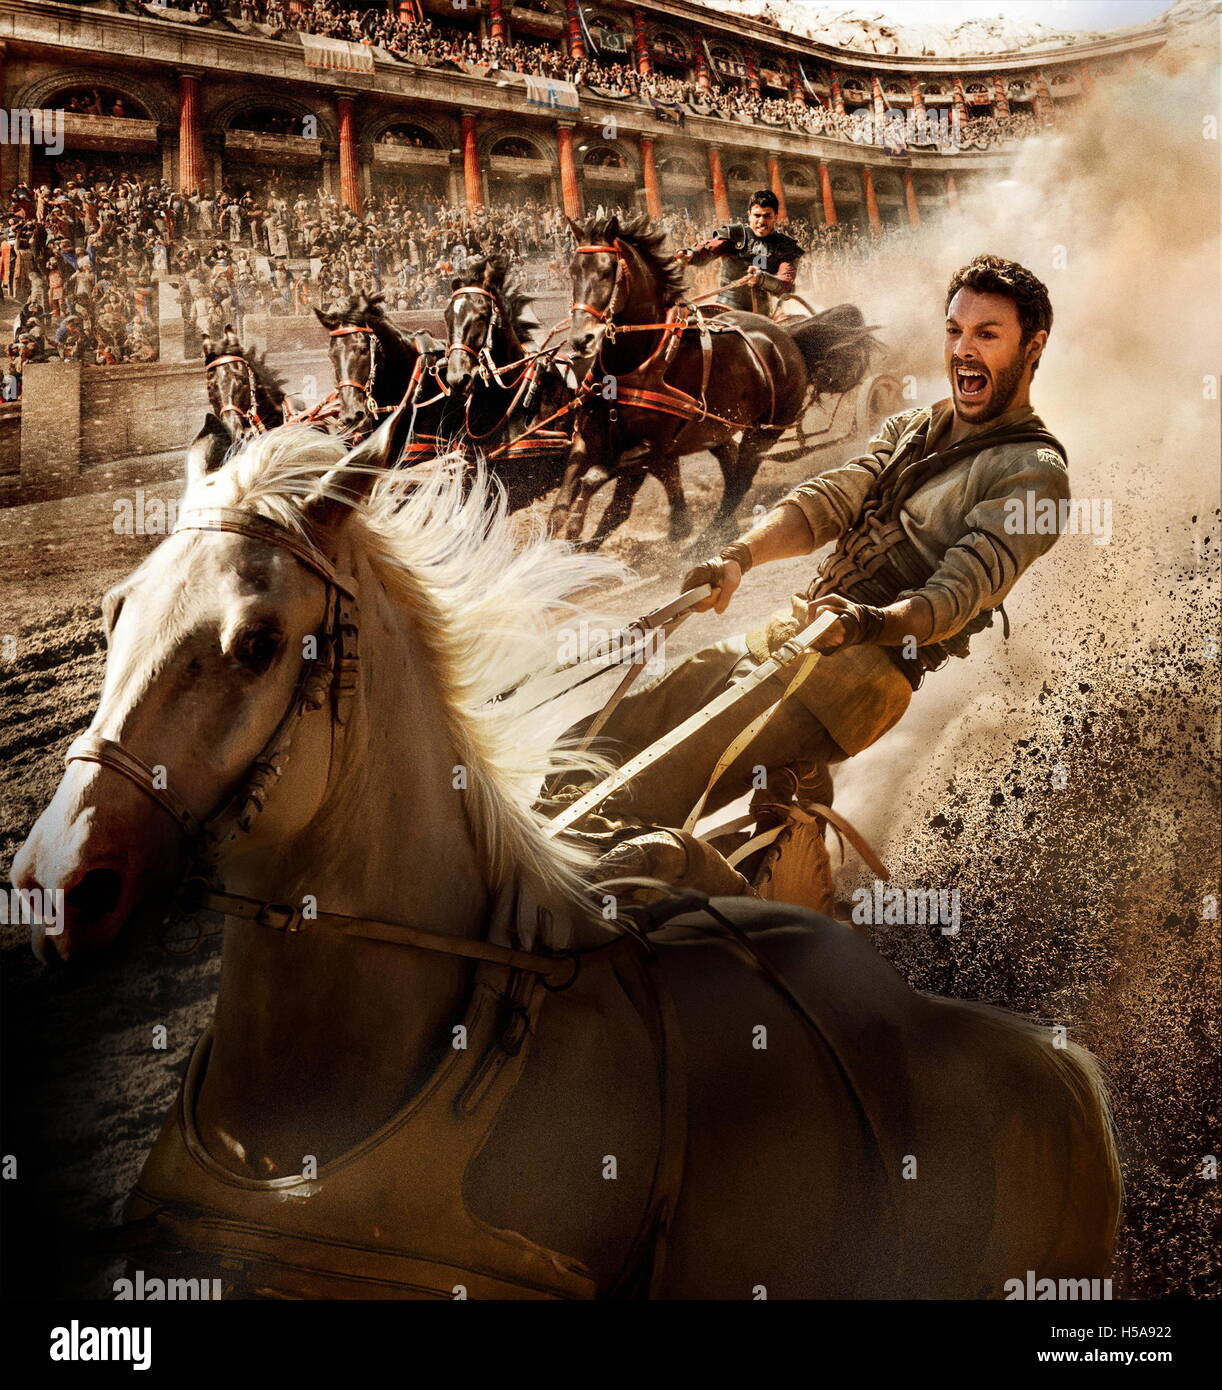 RELEASE DATE: August 19, 2016. TITLE: Ben-Hur Ben Hur STUDIO: Paramount Pictures DIRECTOR: Timur Bekmambetov PLOT: A falsely accused Jewish nobleman survives years of slavery to take vengeance on his Roman best friend, who betrayed him STARRING: Jack Huston, Toby Kebbell, Rodrigo Santoro (Credit Image: c Paramount Pictures/Entertainment Pictures/) Stock Photo